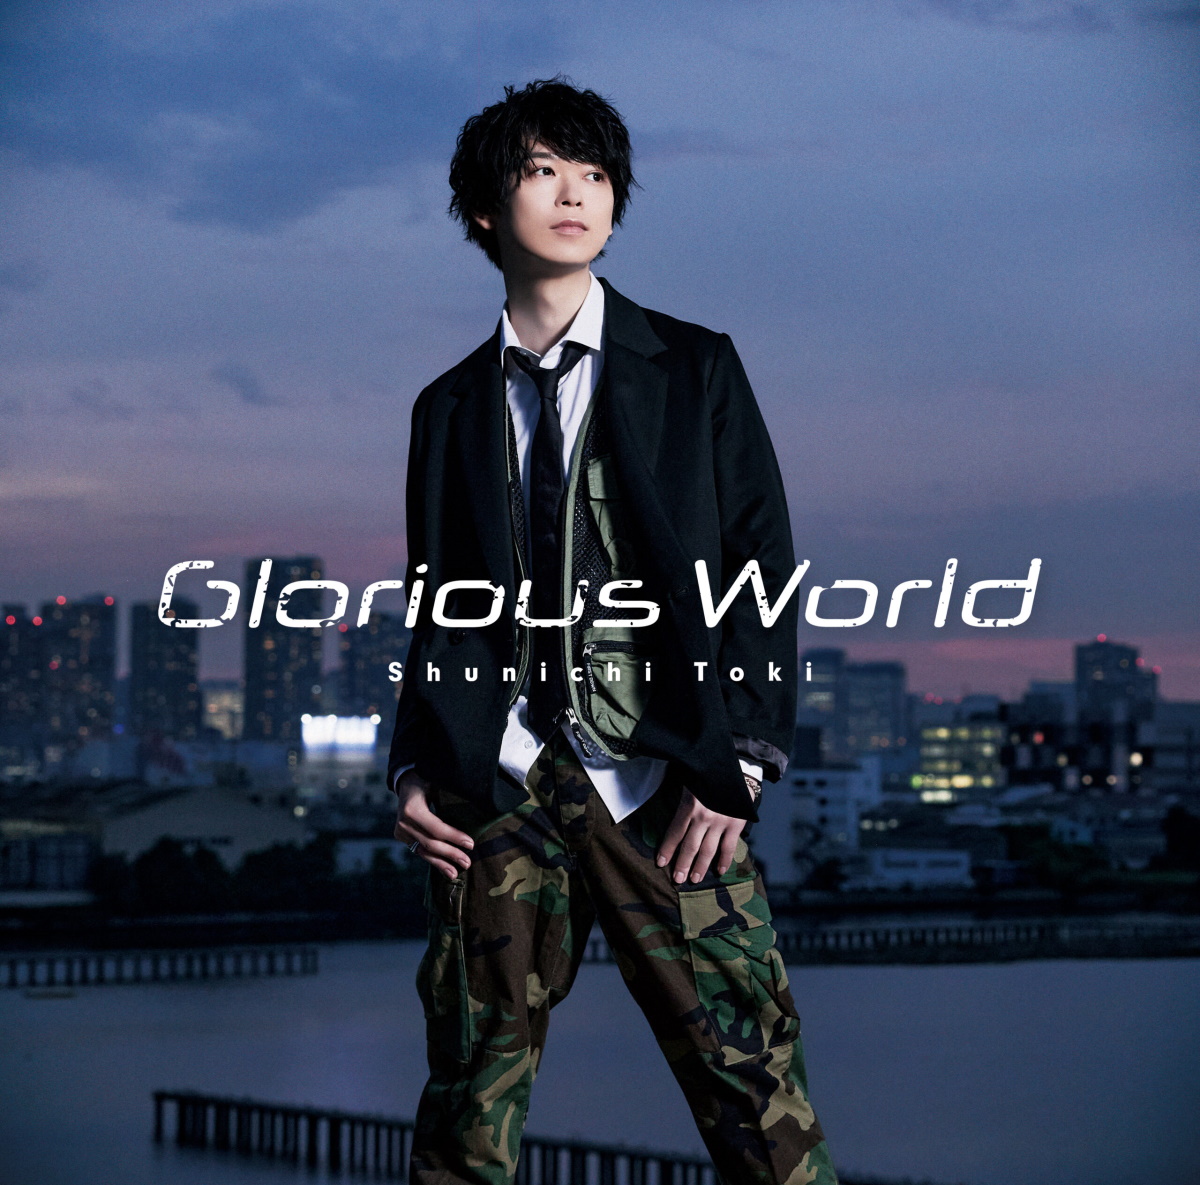 Cover art for『Shunichi Toki - Glorious World』from the release『Glorious World』